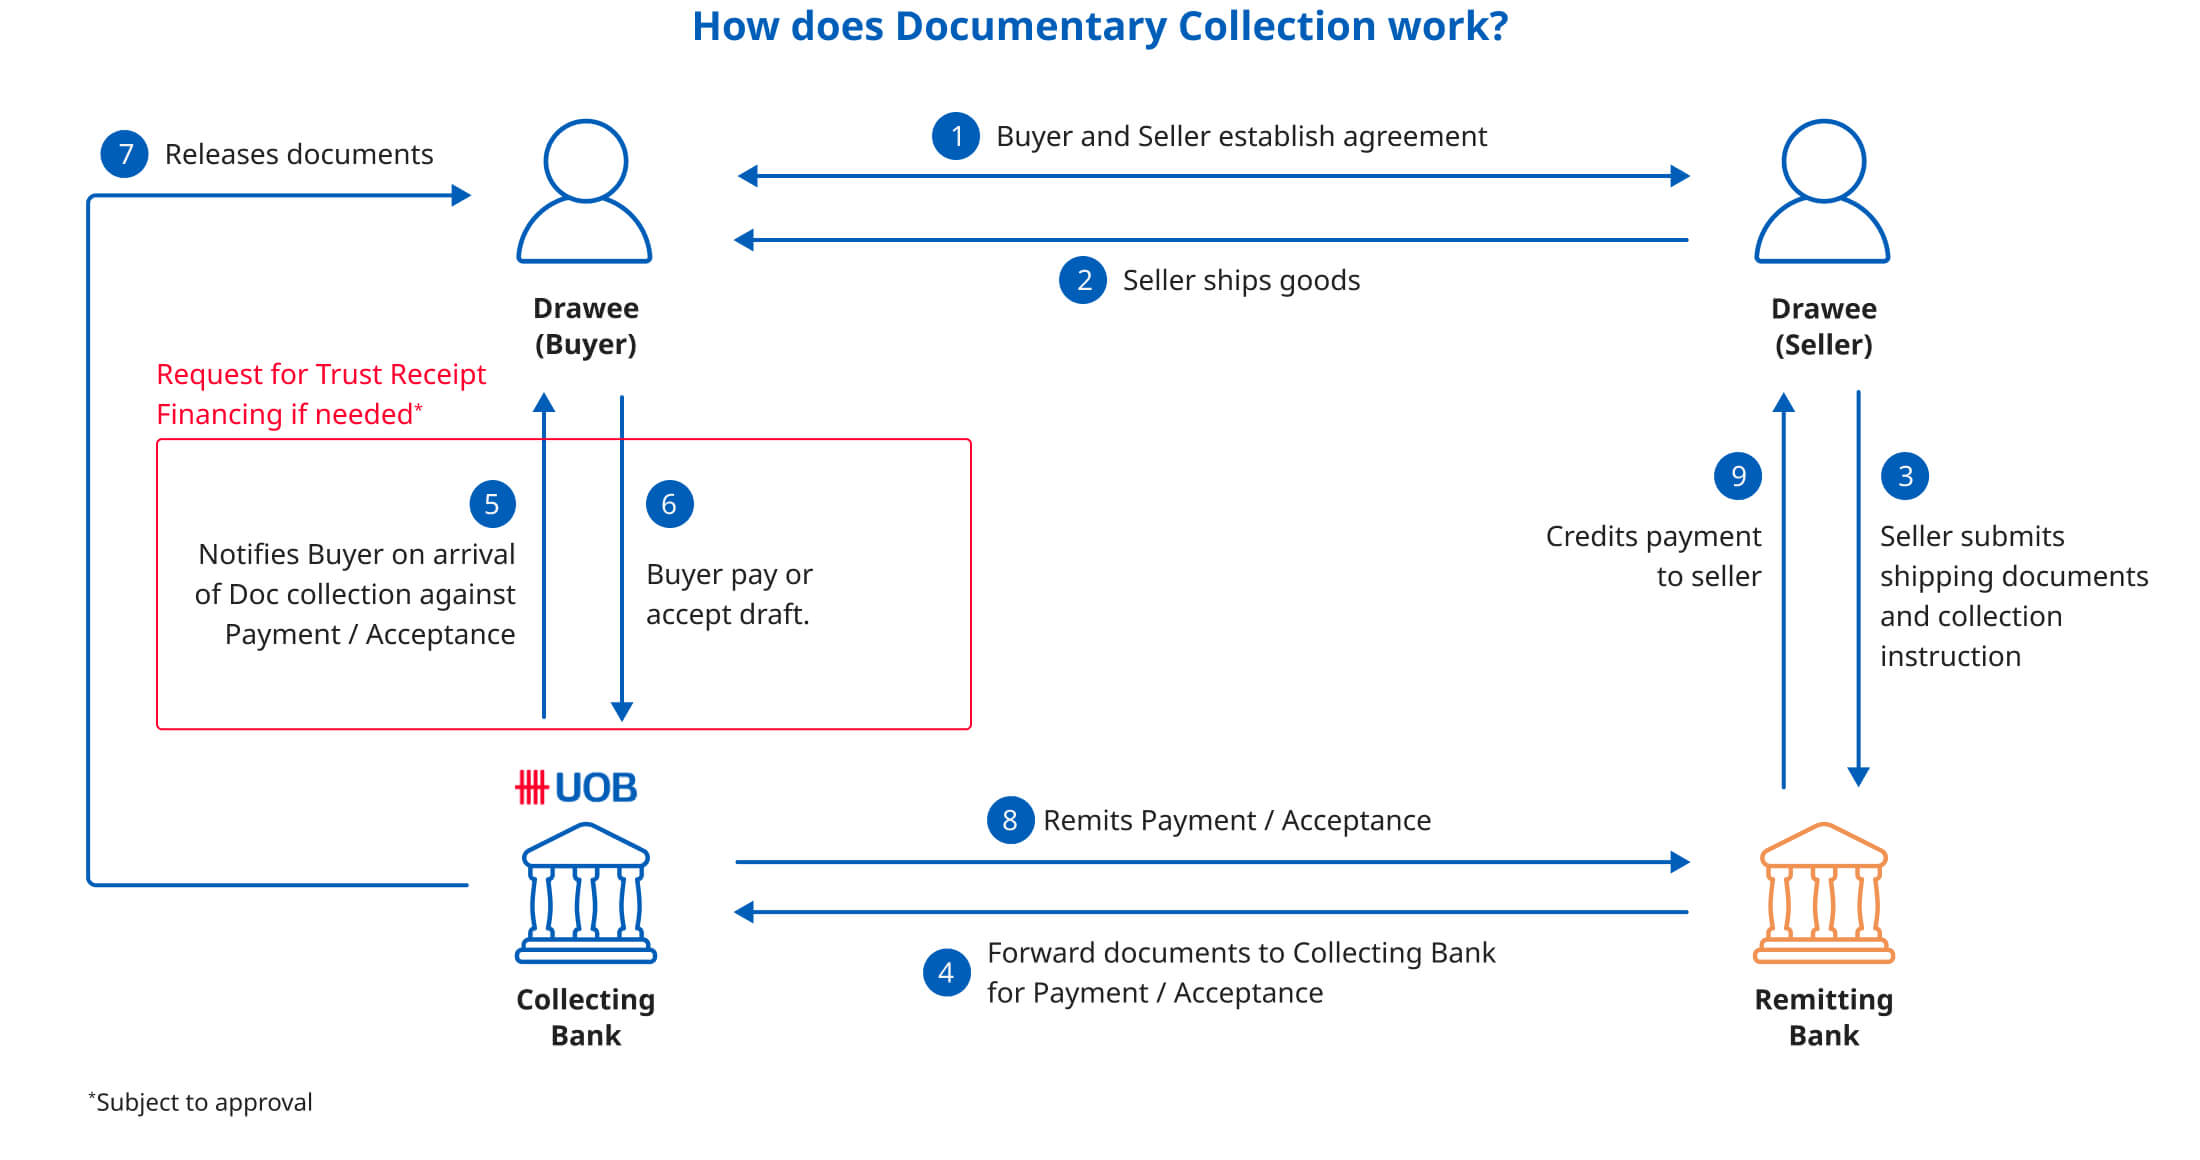 How does Documentary Collection work?